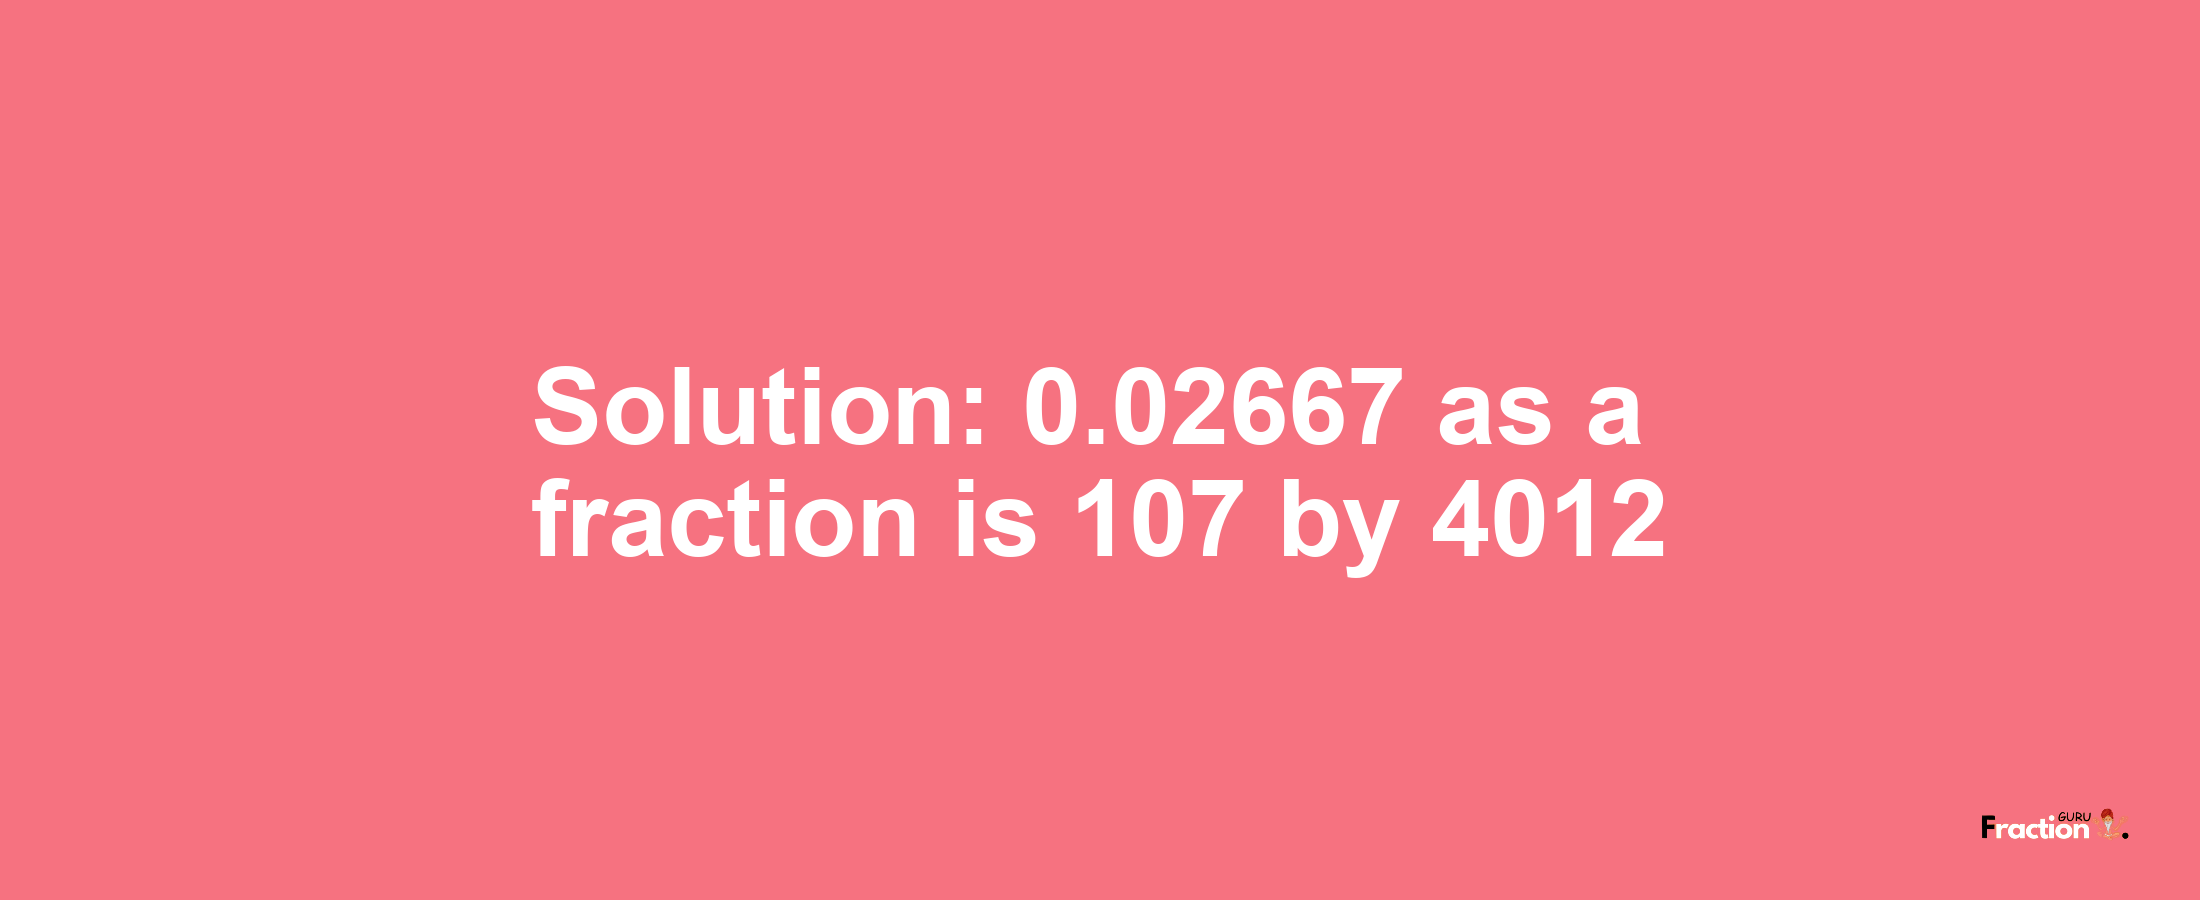 Solution:0.02667 as a fraction is 107/4012